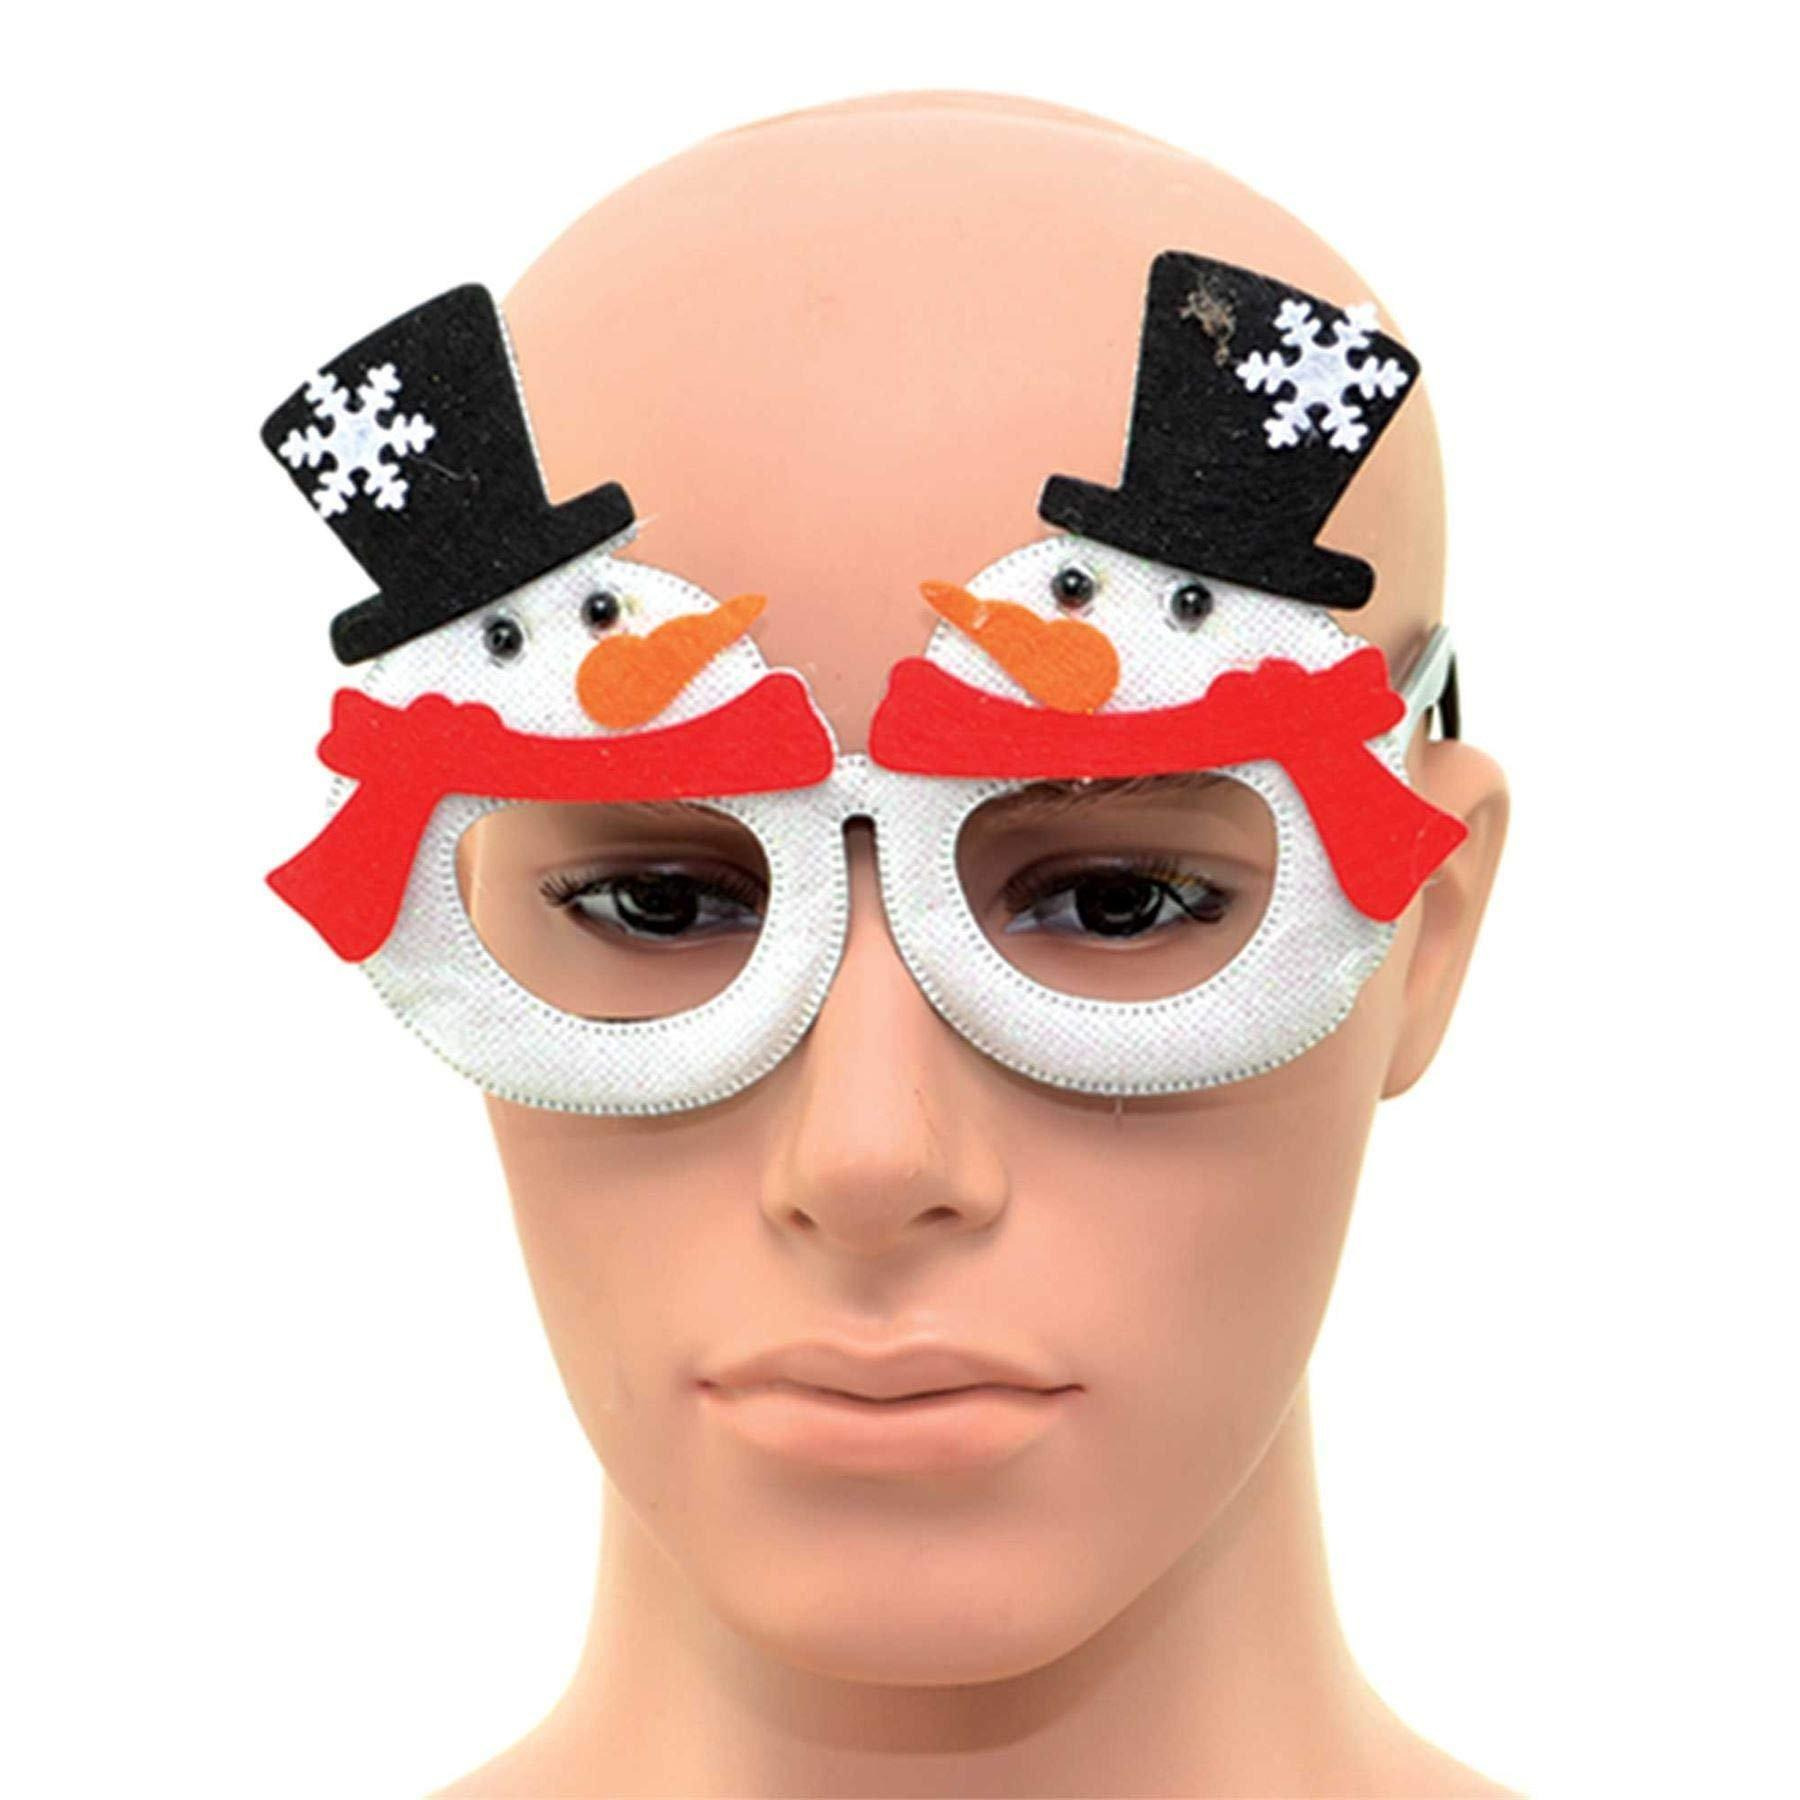 Novelty Glitter White Snowman Christmas Glasses Christmas Party Props Photo Booth Accessories Stocking Fillers - image 1